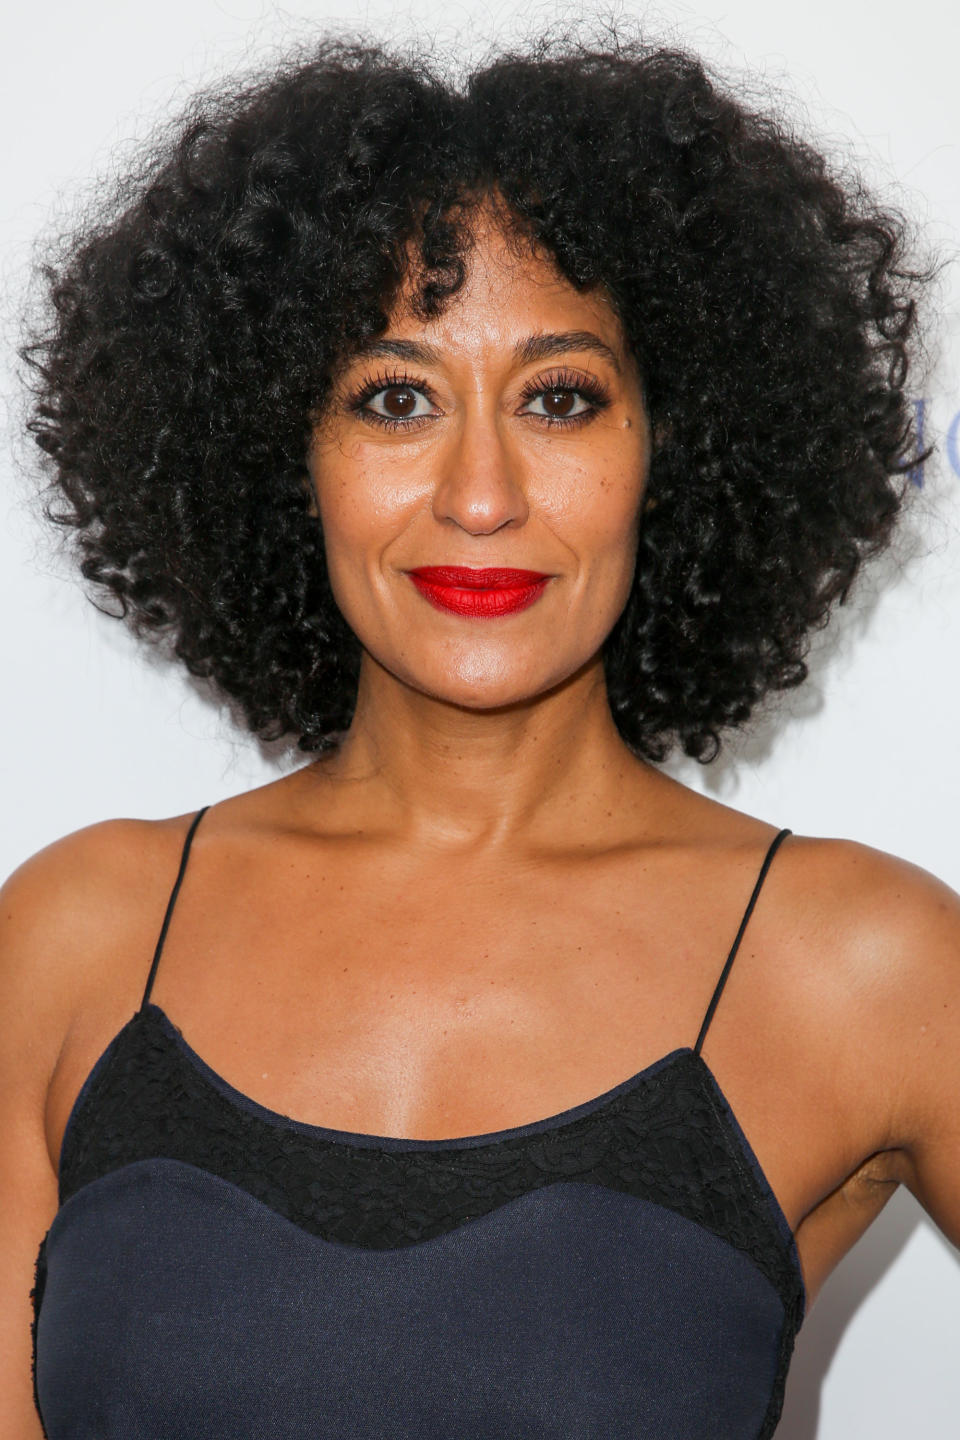 Tracee Ellis Ross  arrives at the 2015 Television Academy Honors at The Montage Hotel on Wednesday, May 27, 2015, in Beverly Hills, Calif. (Photo by Rich FuryInvision/AP)